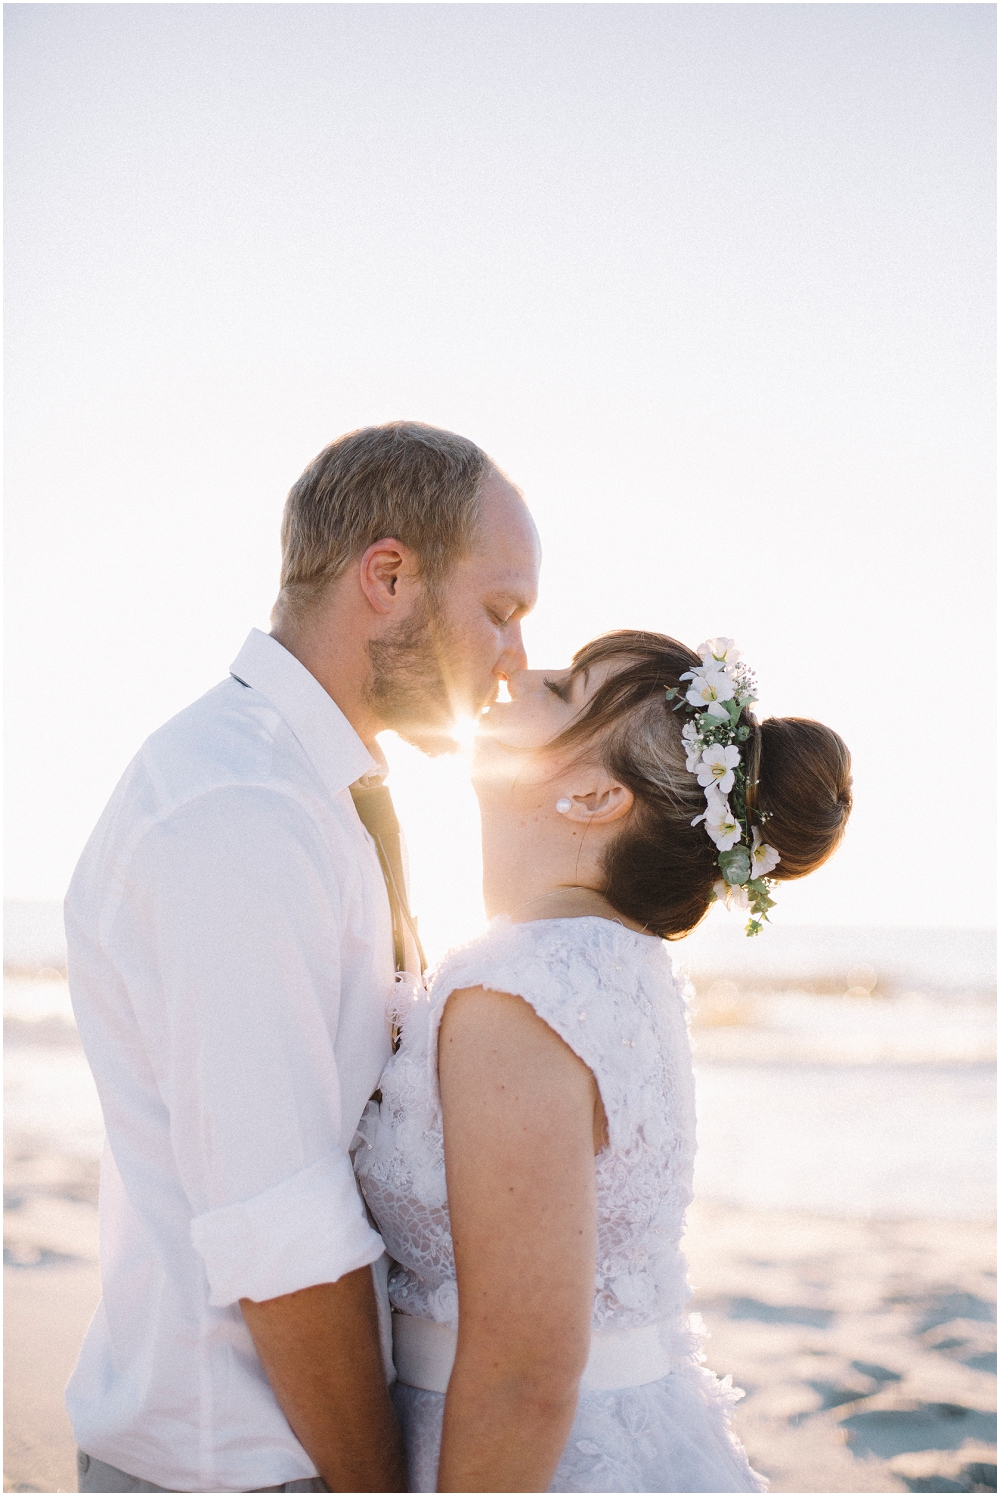 Western Cape Wedding Photographer Ronel Kruger Photography Cape Town_9447.jpg